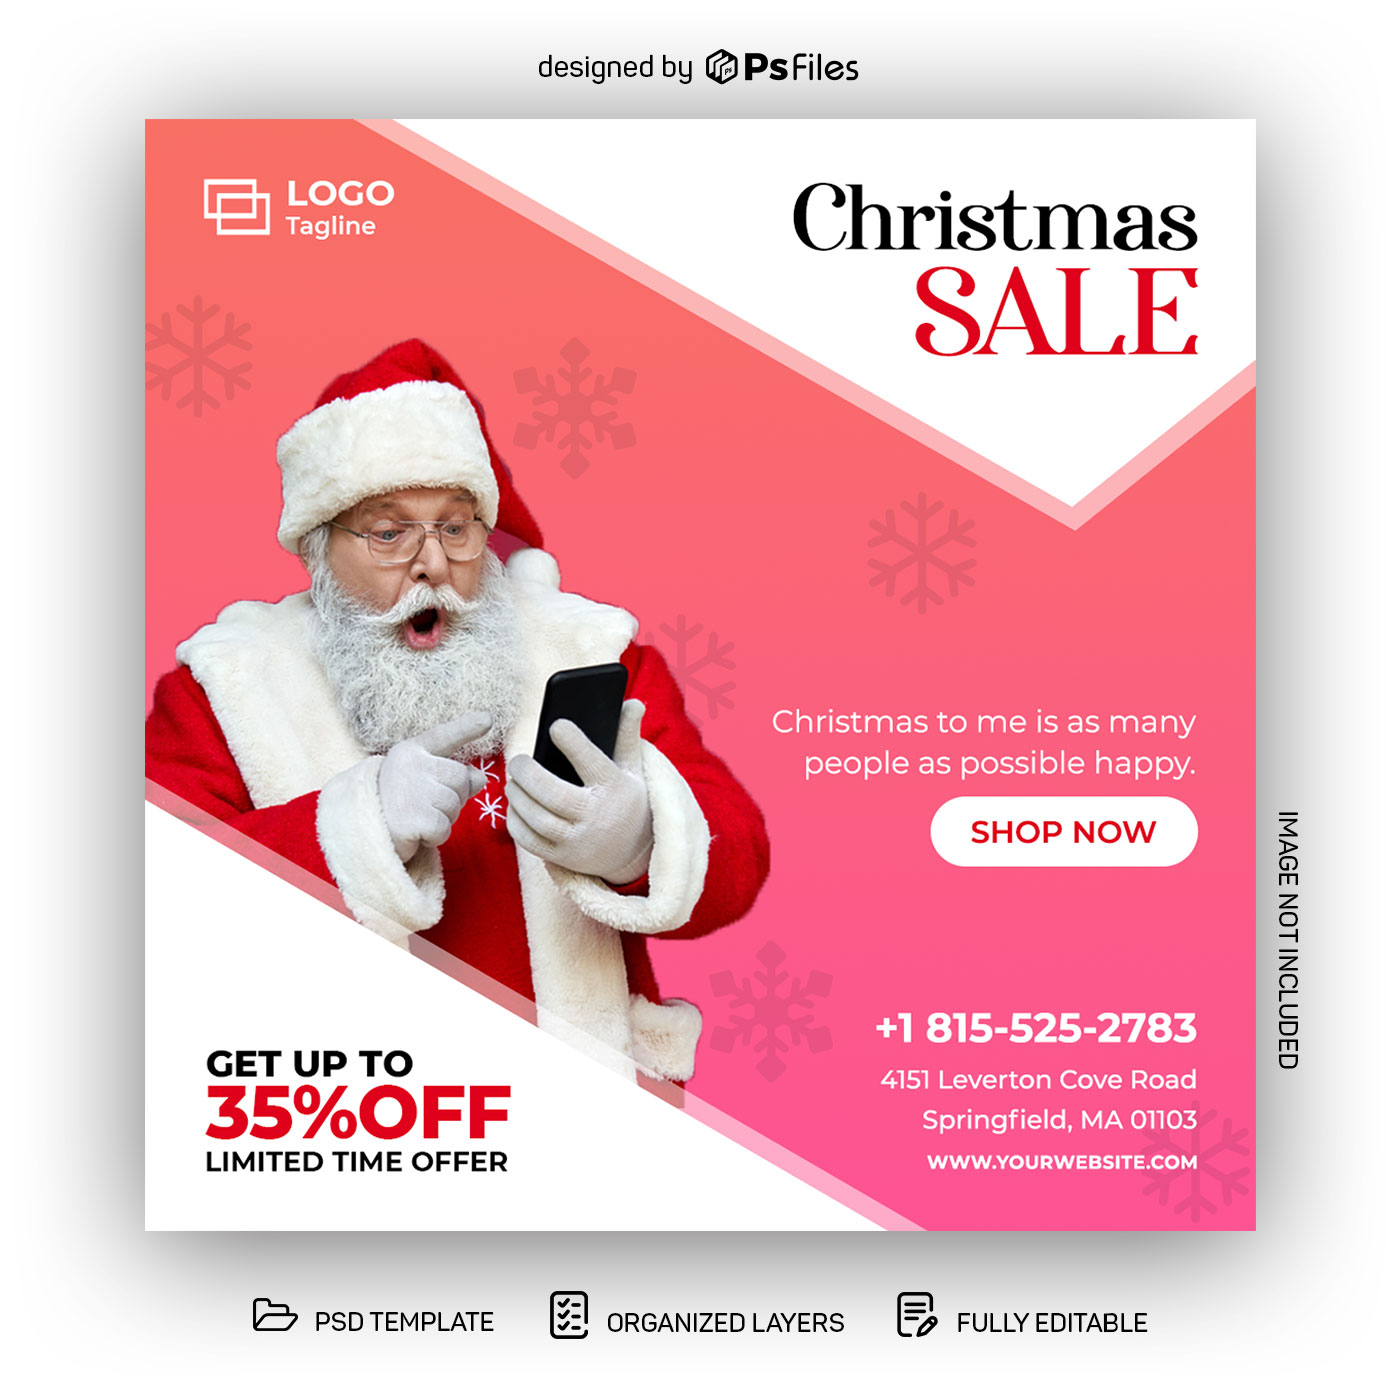 Santa clause looking on Mobile phone Red color Christmas Limited Offer Social Post Design Template PSD for Free